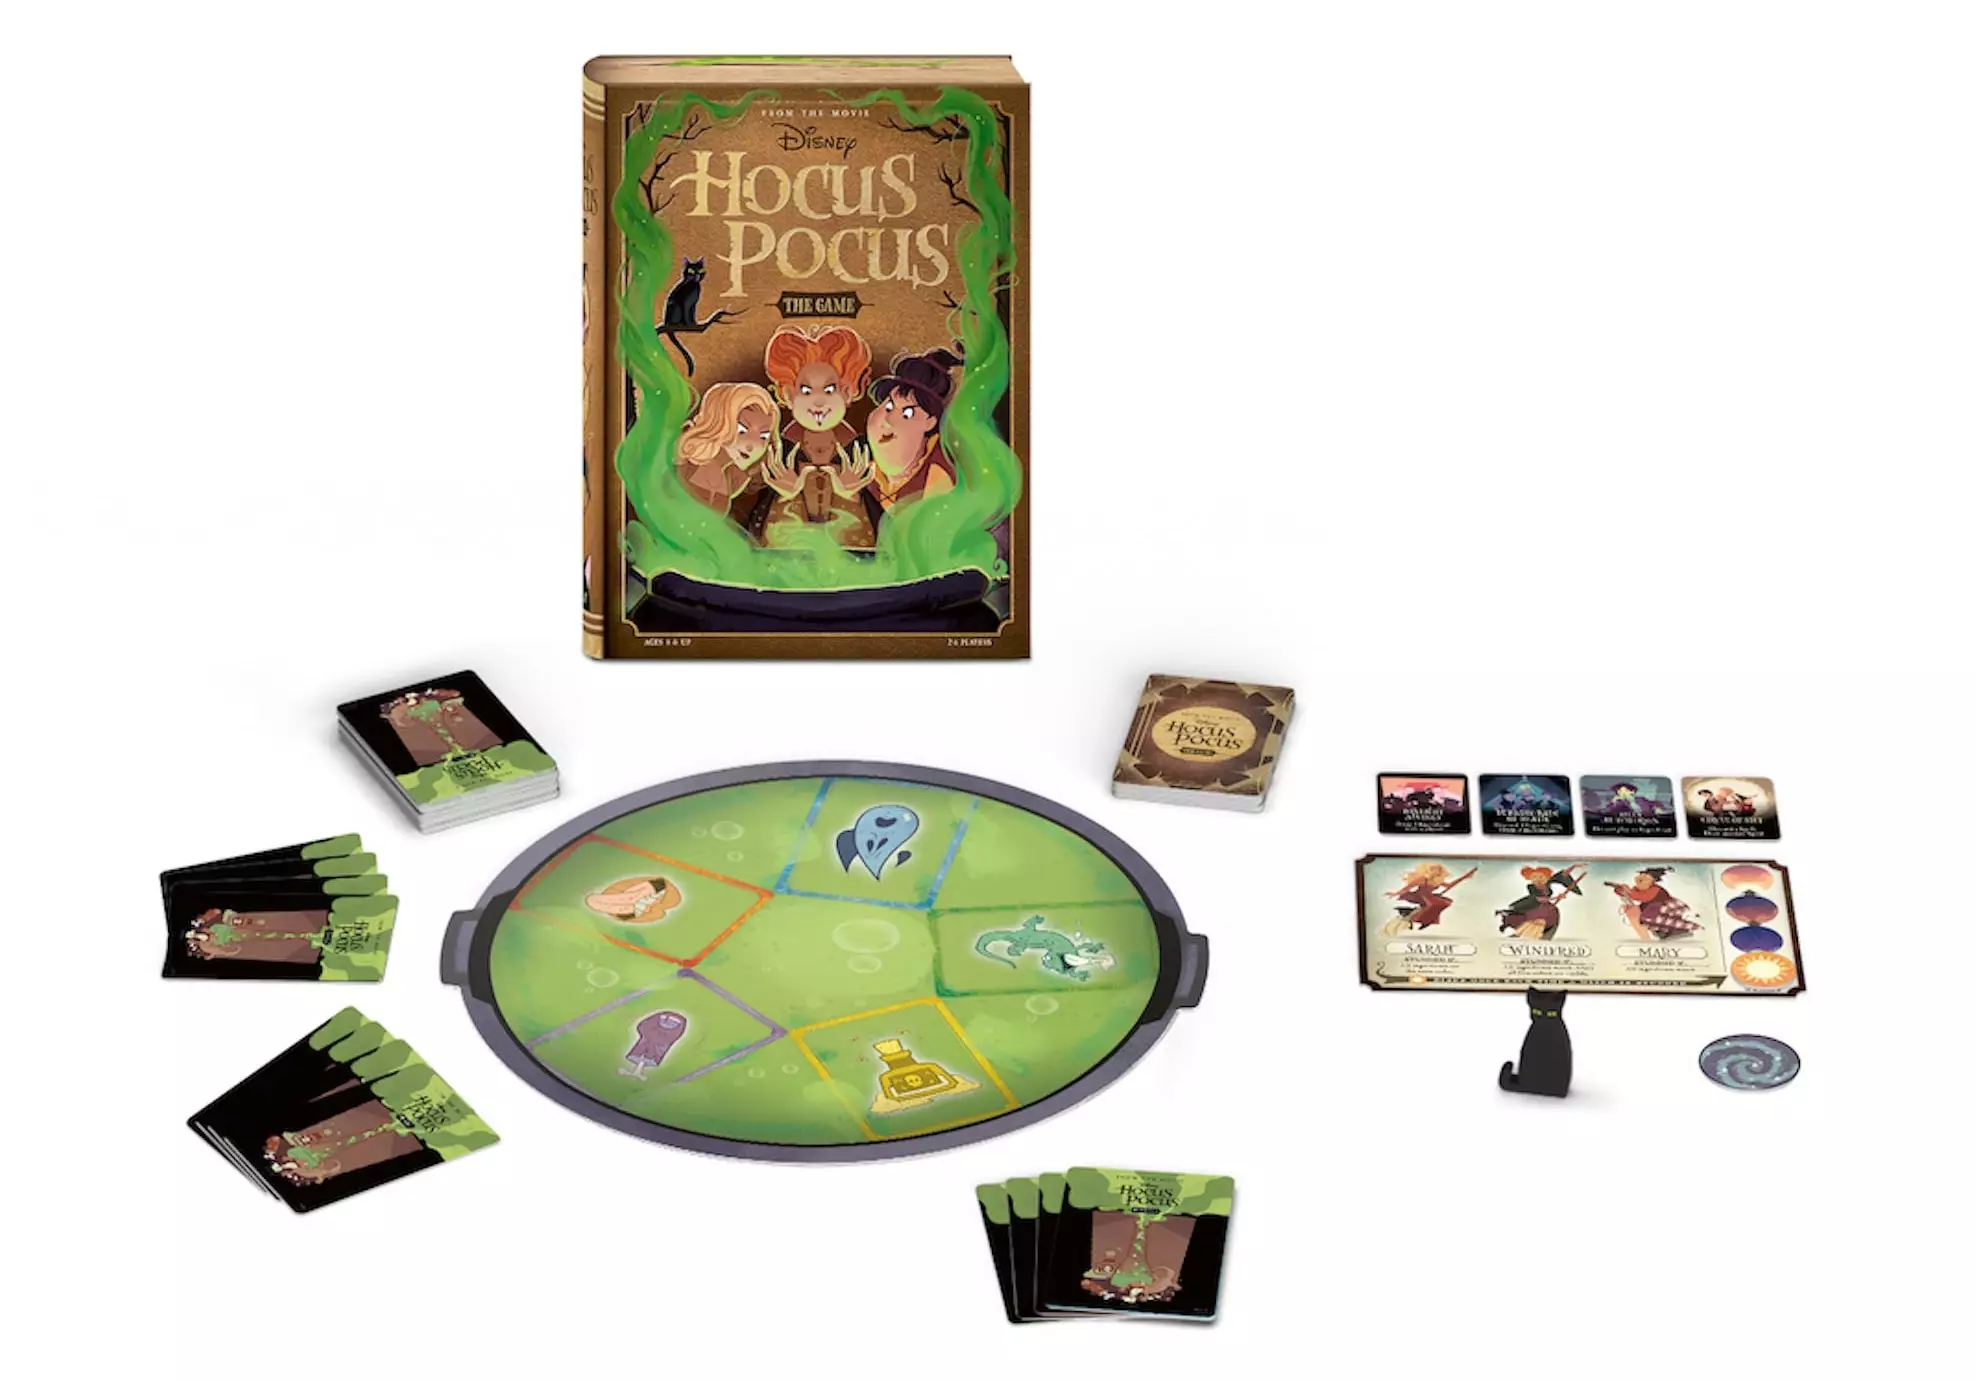 The 'Hocus Pocus' game will be launched this August (